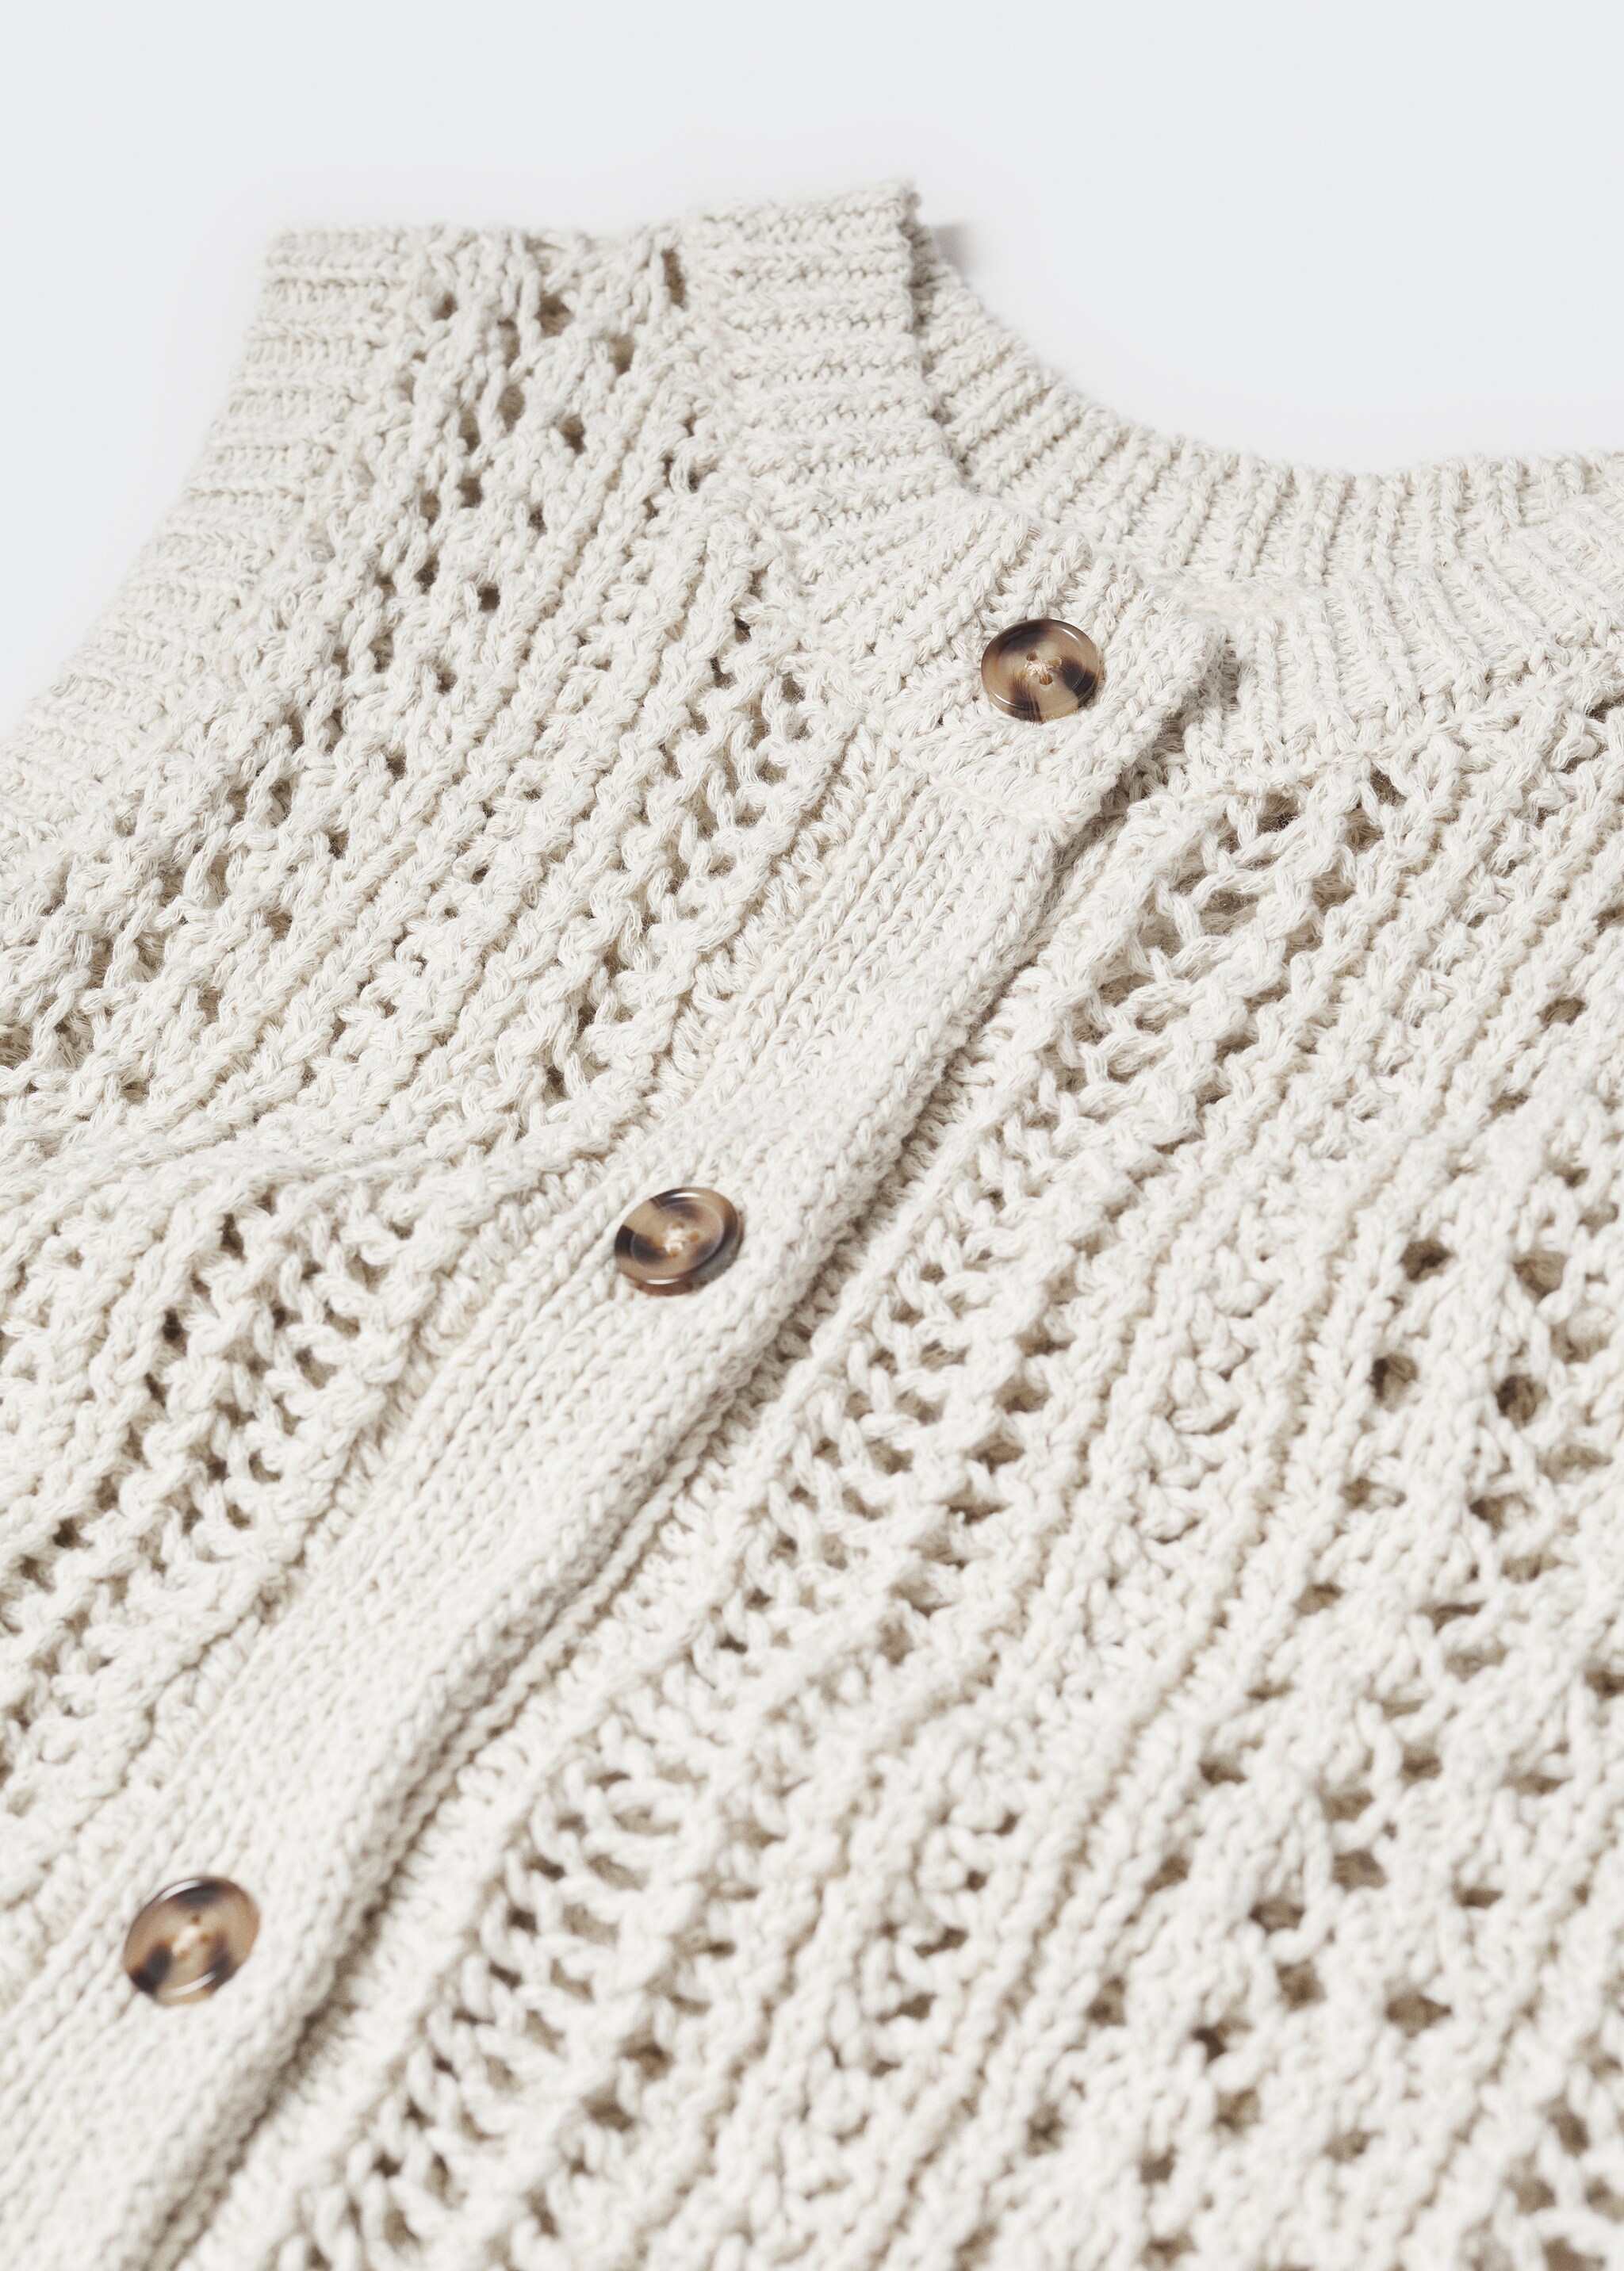 Openwork knit cotton cardigan - Details of the article 8